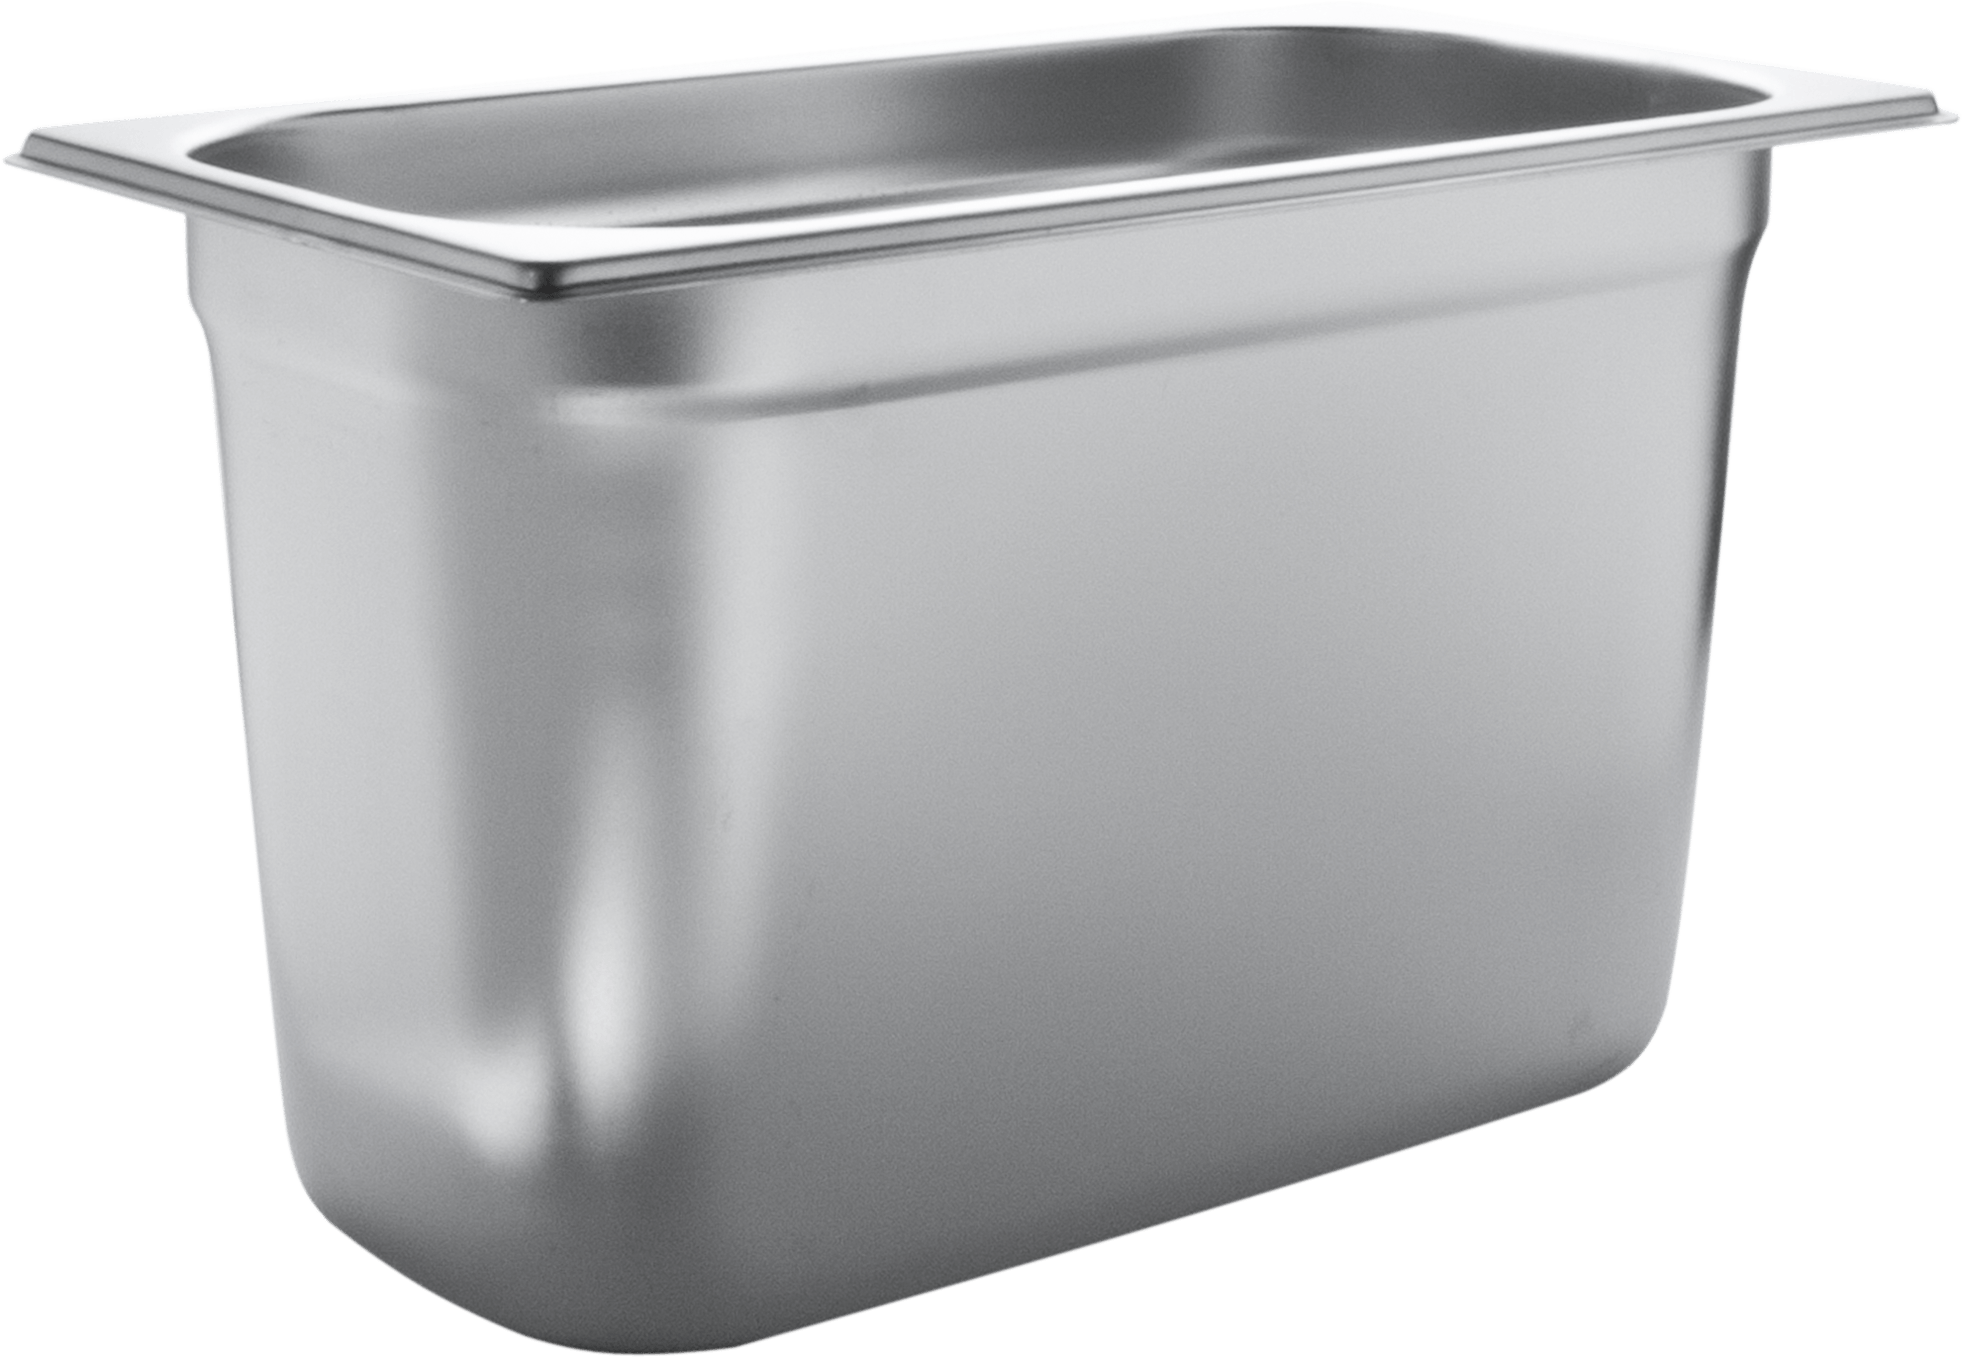 Gastronomy-standard container 200mm depth - stainless steel (GN 1/3)